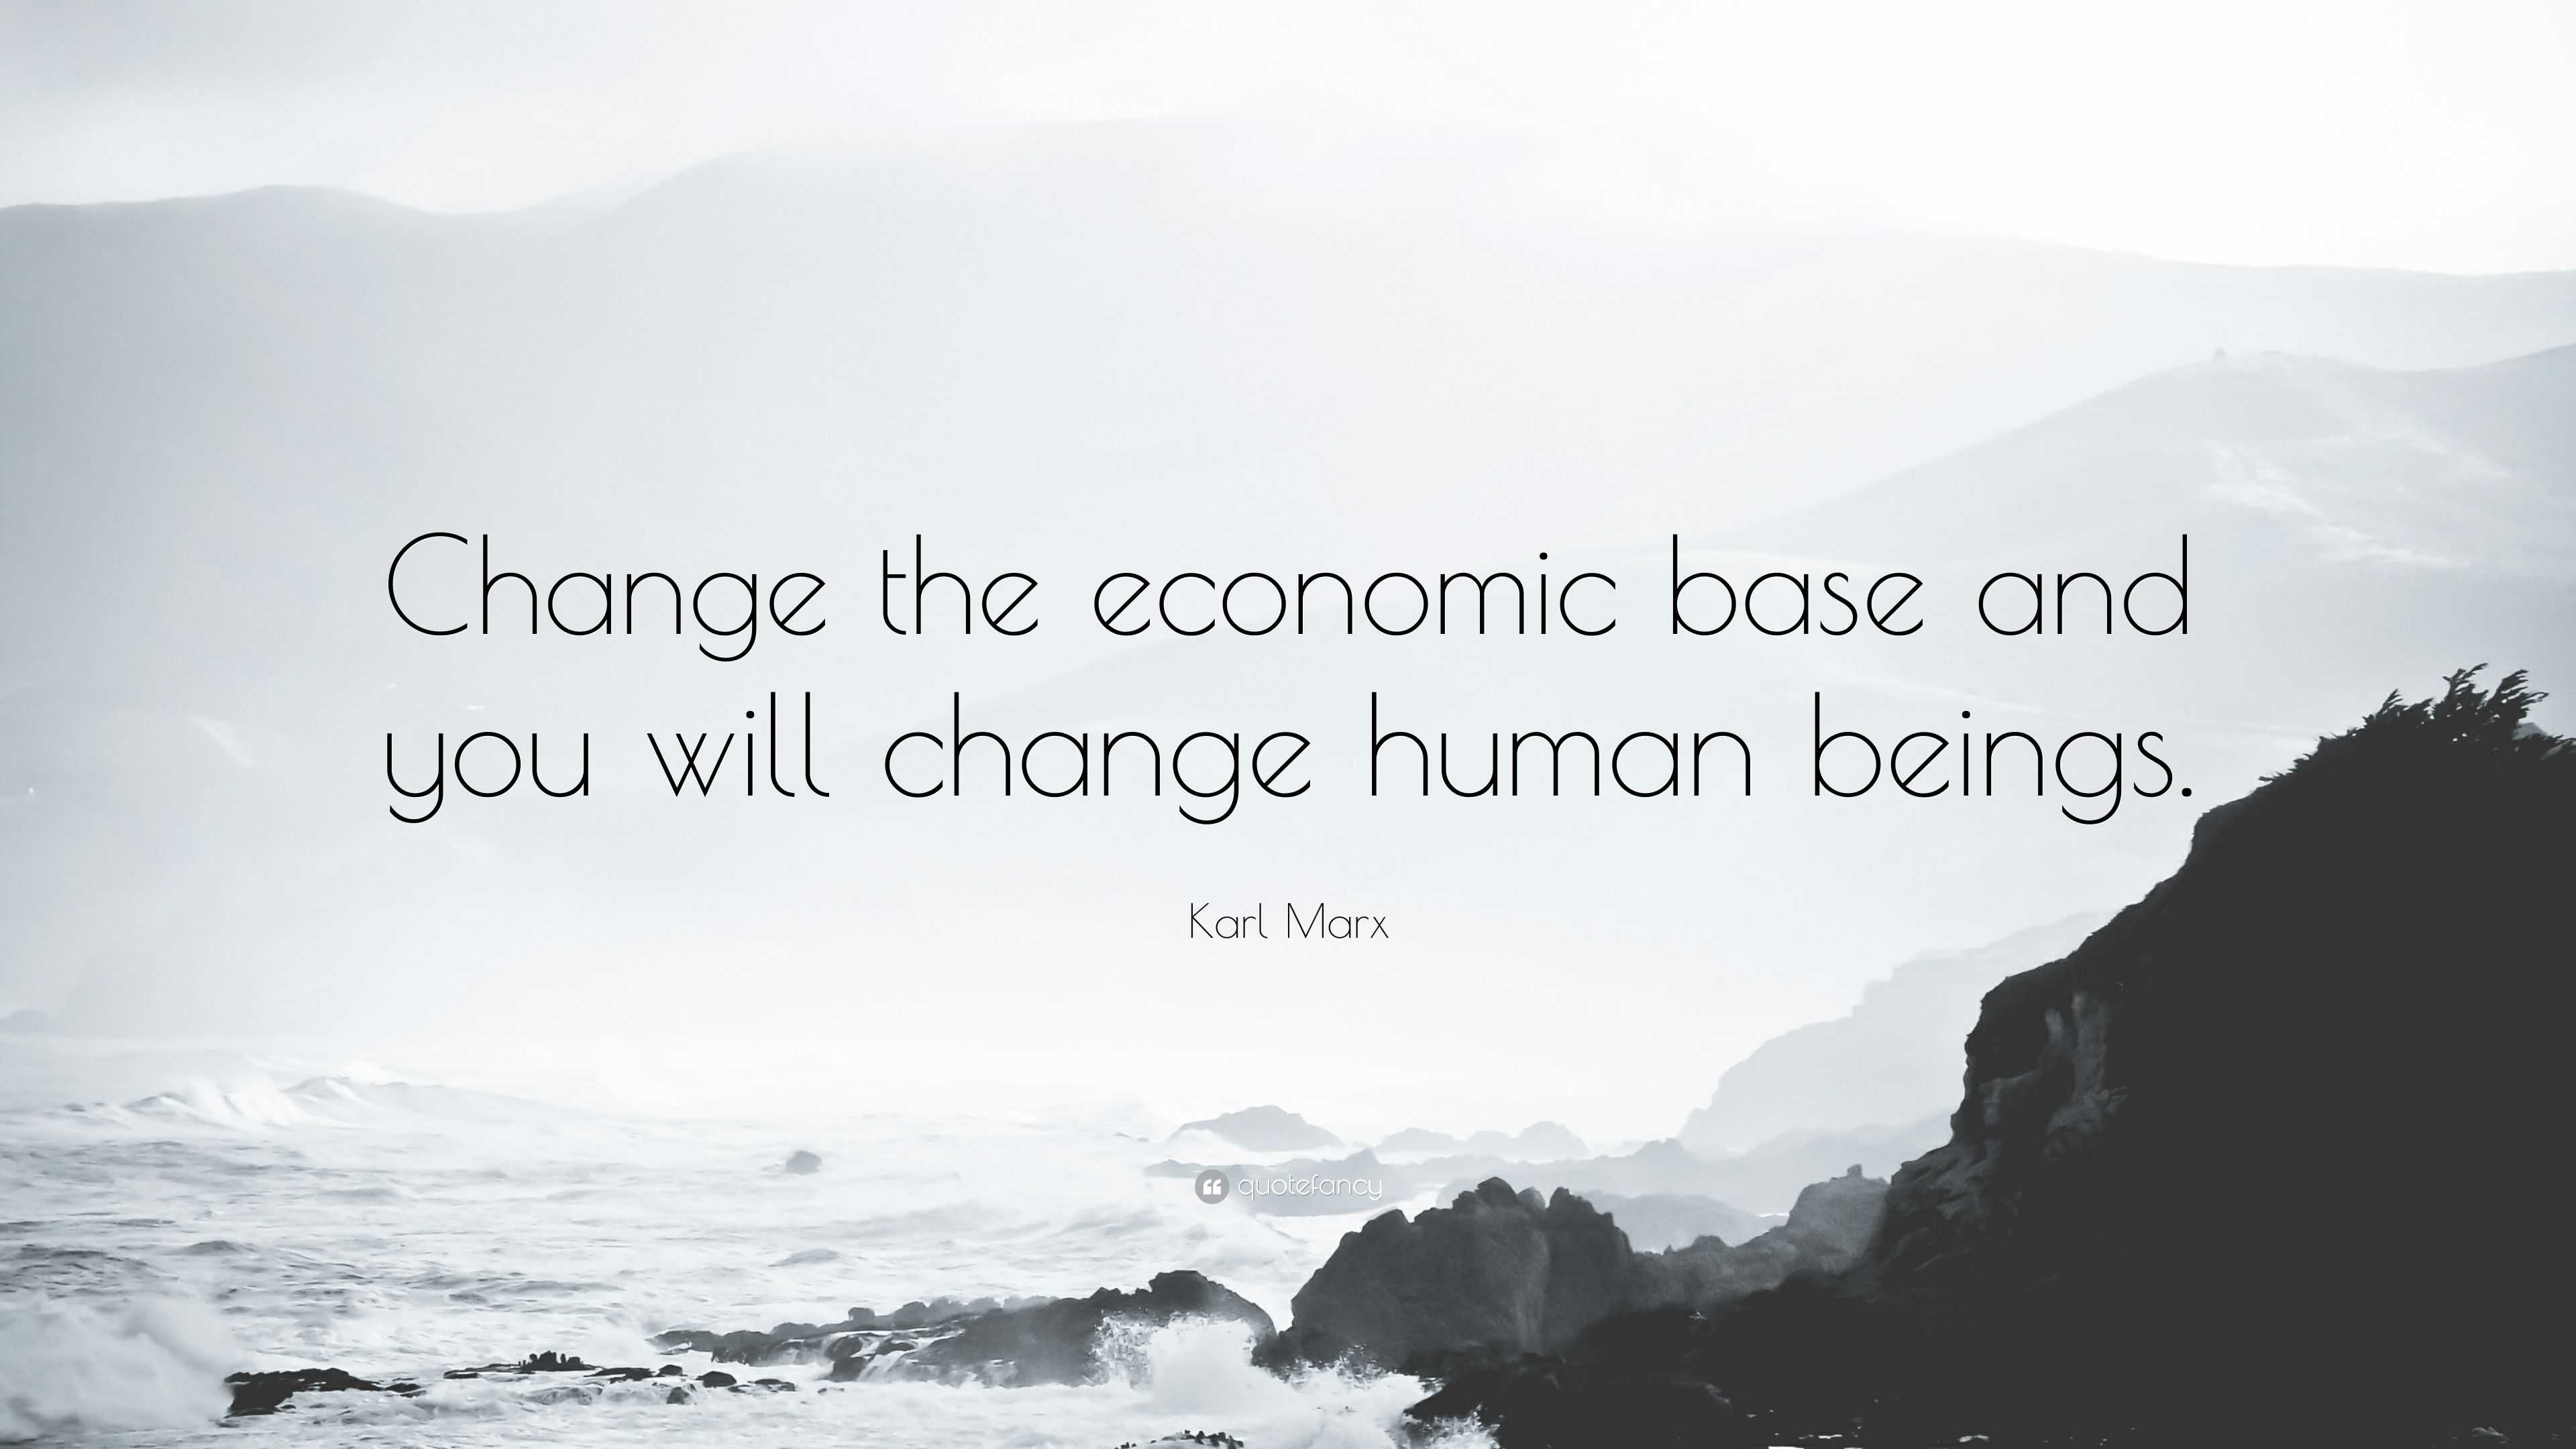 Karl Marx Quote: “Change the economic base and you will change human